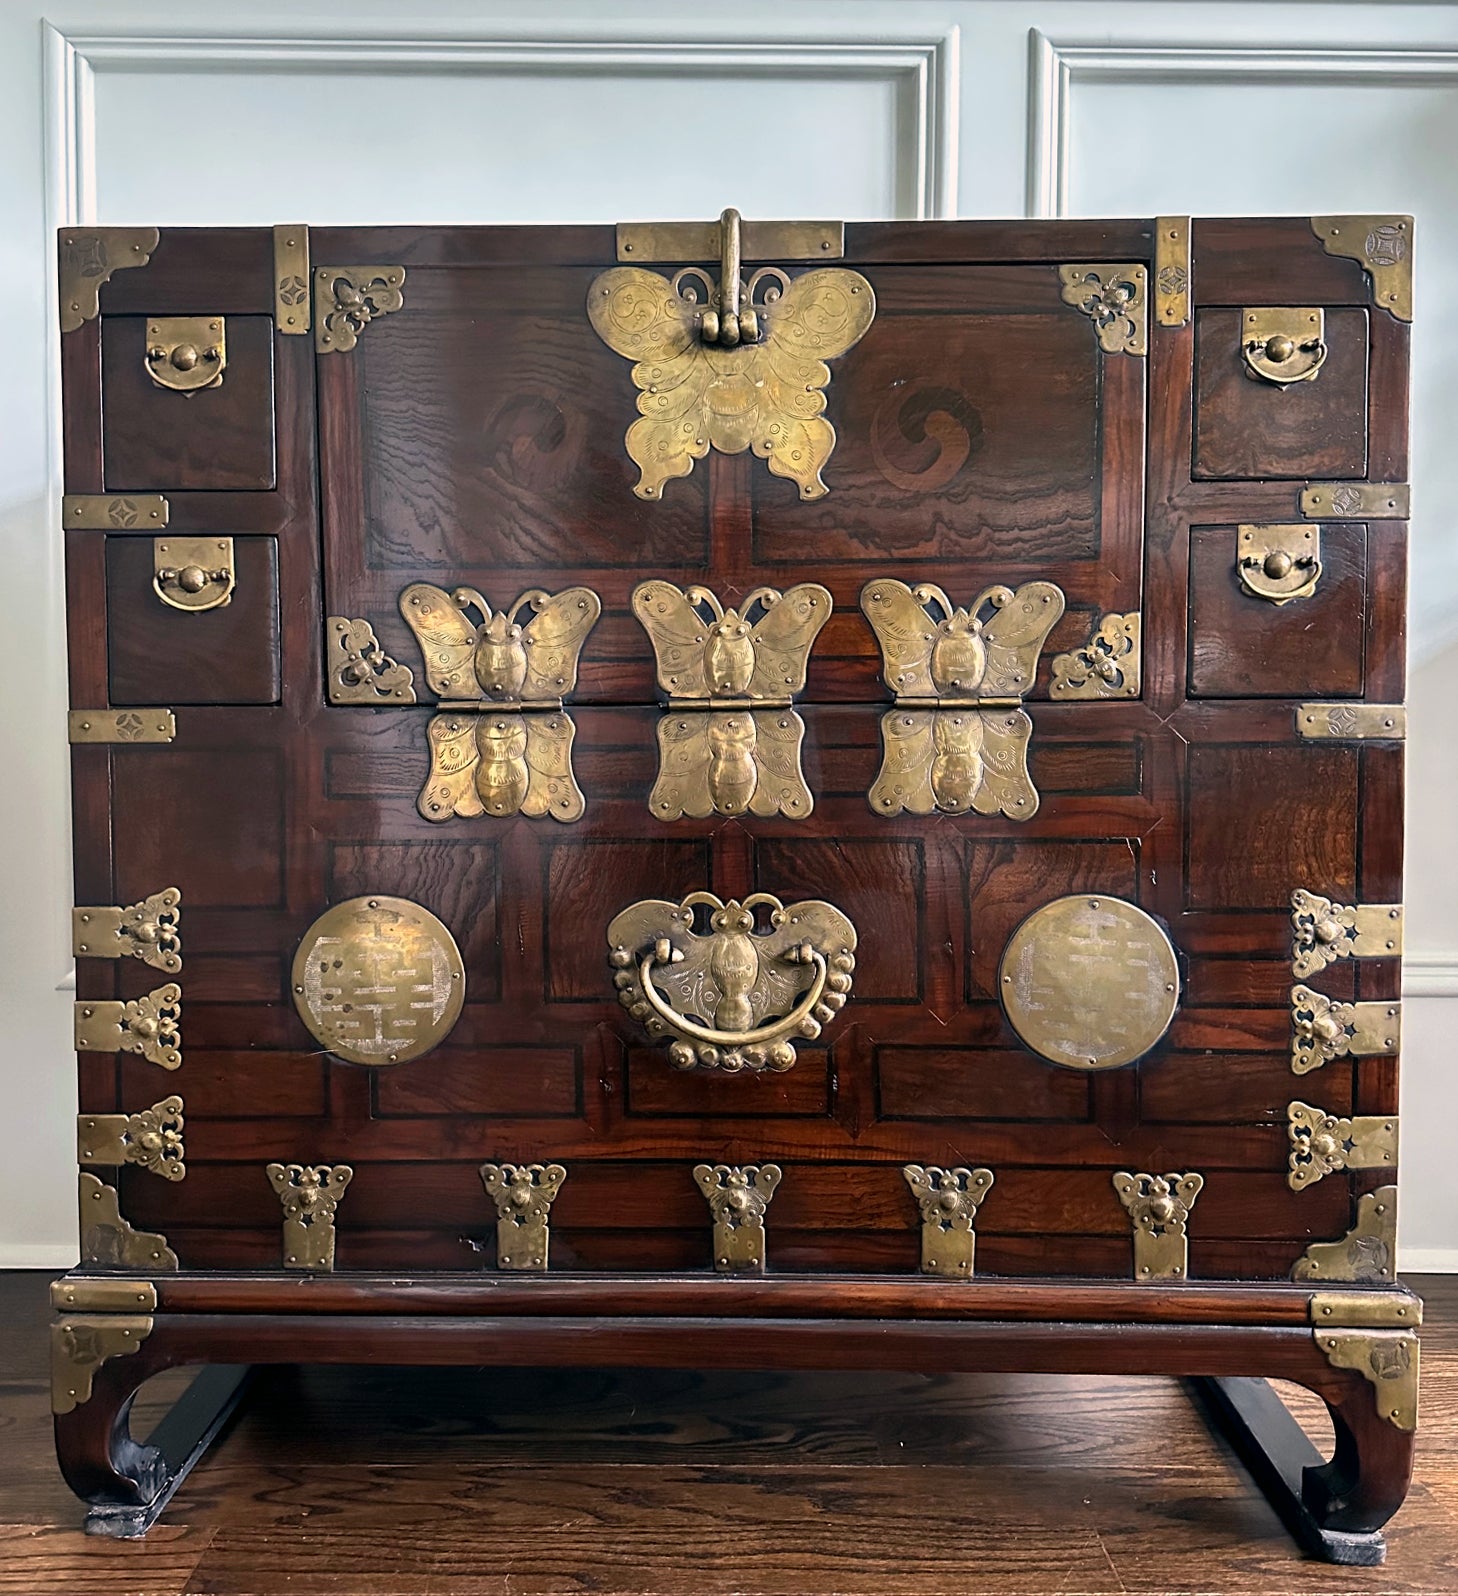 A Korean Bandaji Chest circa late 19th century toward the end of Joseon Dynasty from Gyeonggi Do. Bandaji is known as drop front half opening chest and was traditionally used to store household valuables and beddings. On special occasion such as